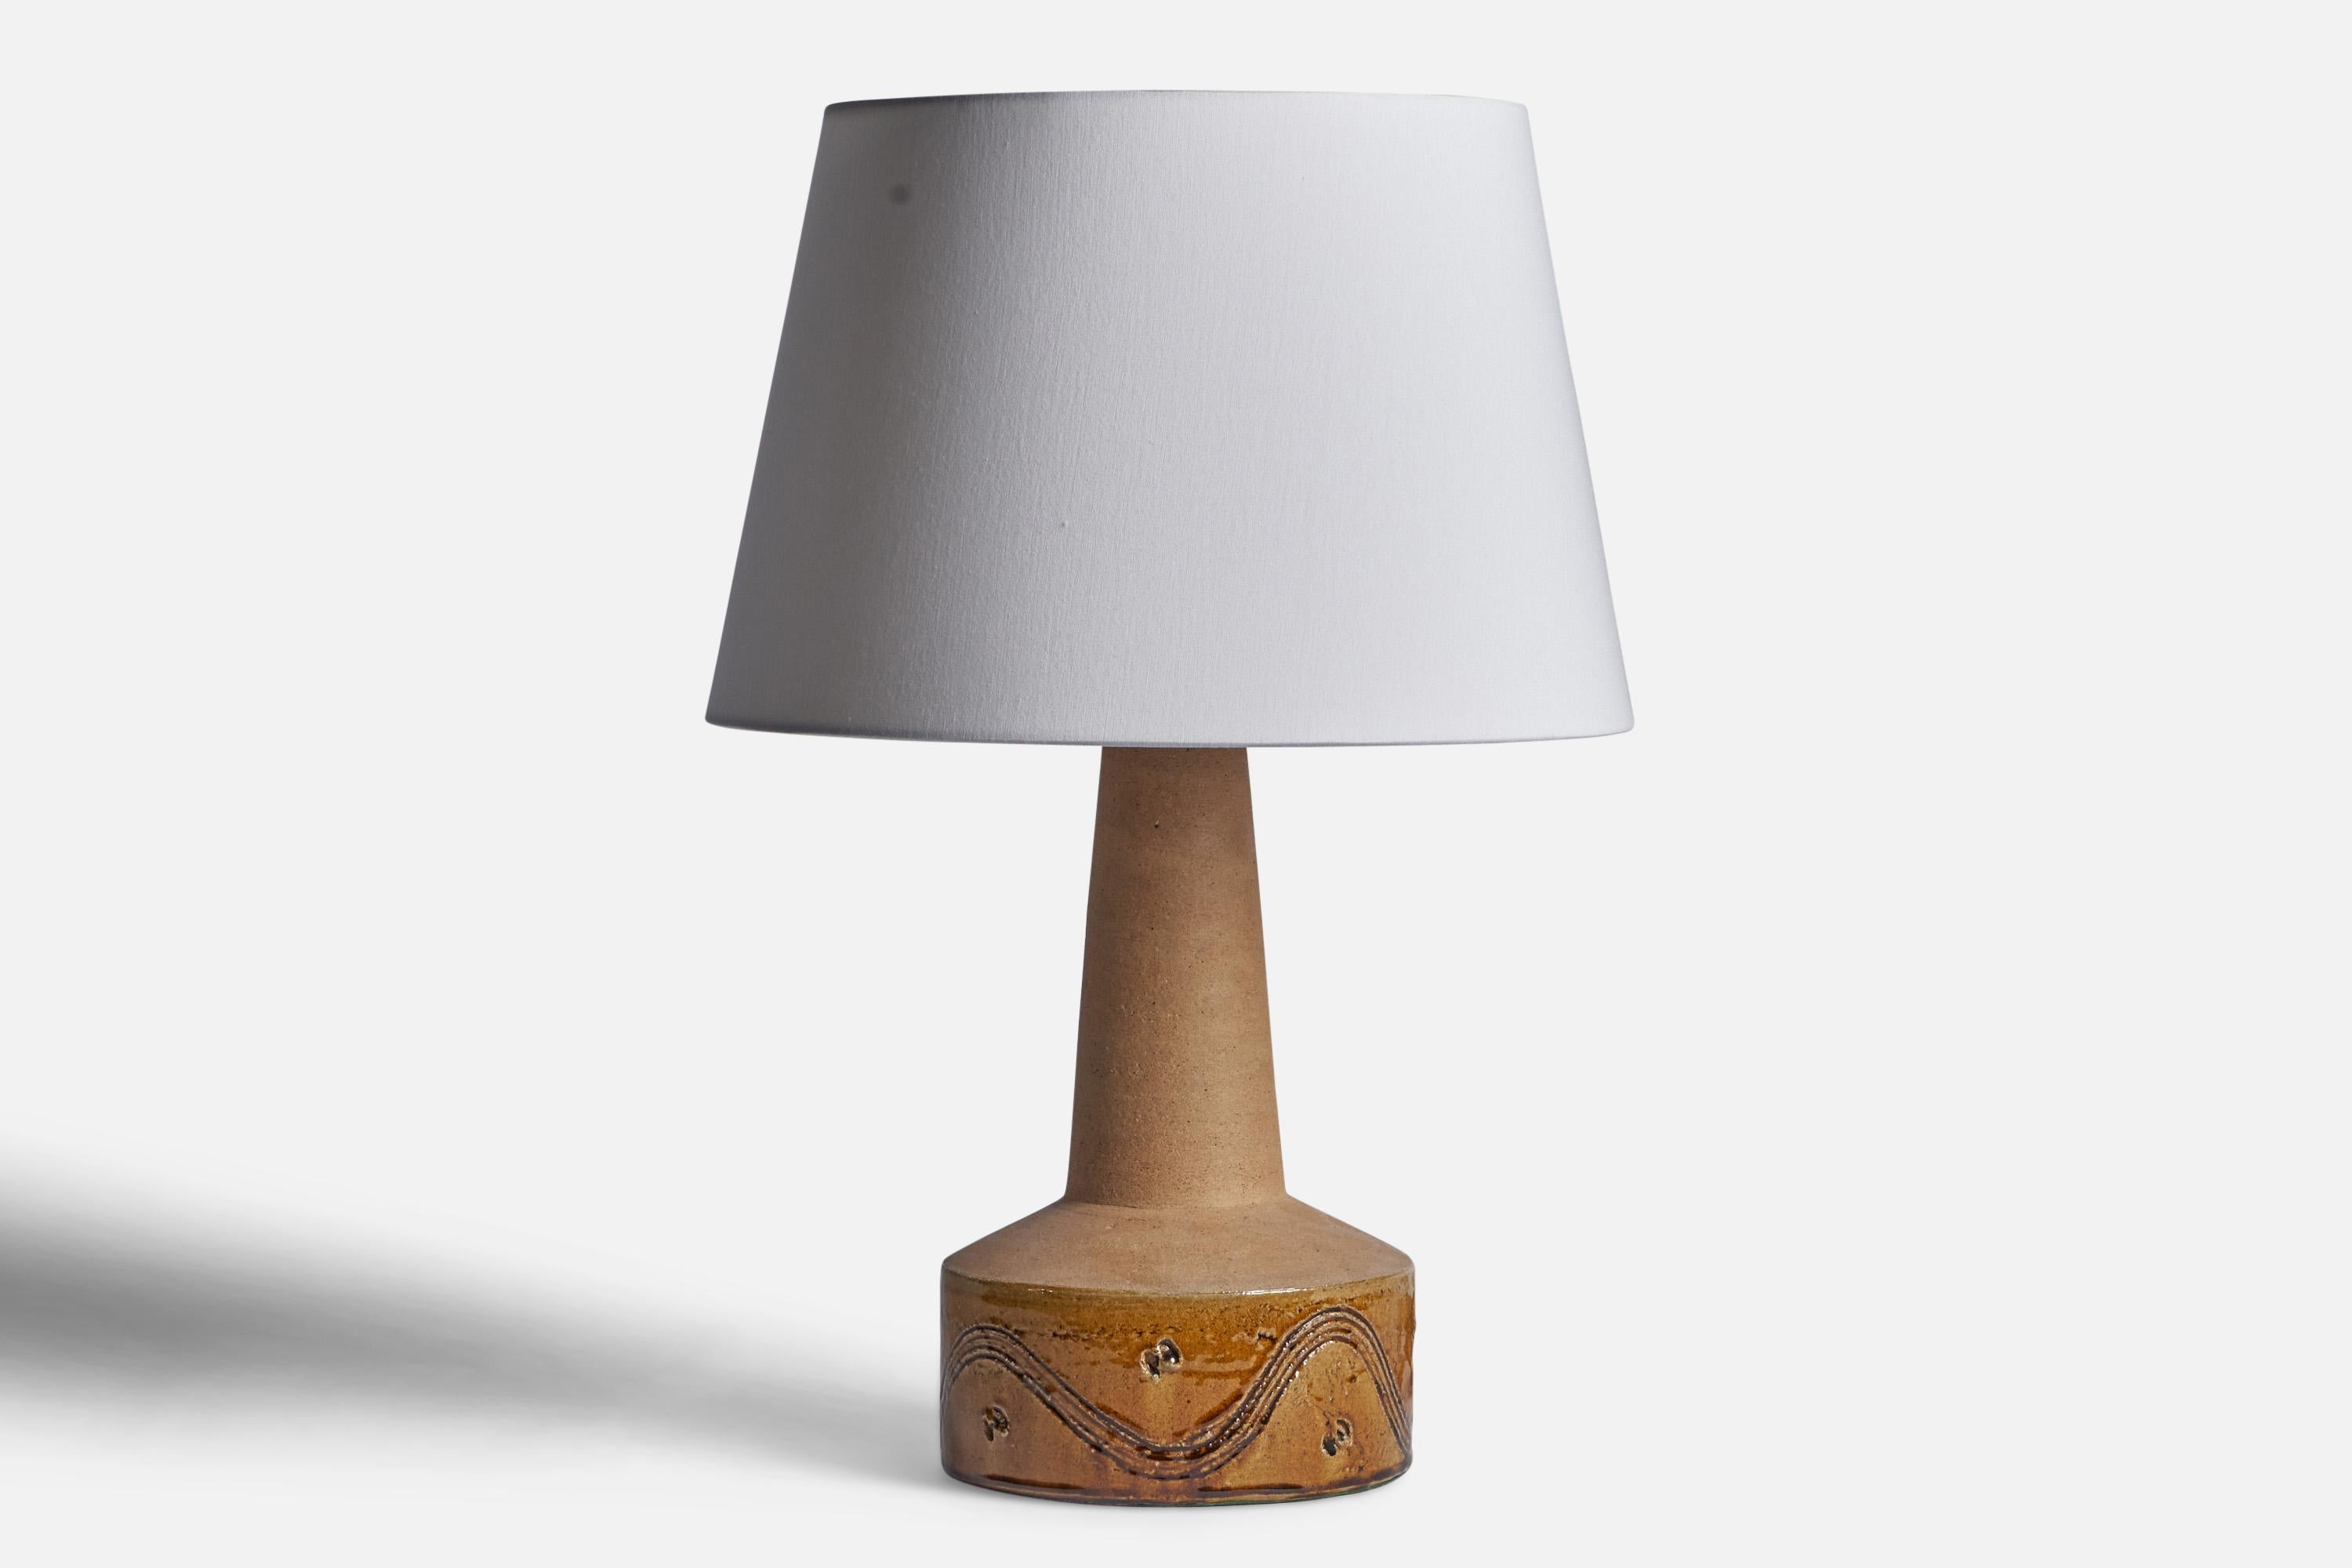 A beige semi-glazed ceramic table lamp designed and produced by Kähler, Denmark, c. 1940s.

Dimensions of Lamp (inches): 20.75” H x 8.75” Diameter
Dimensions of Shade (inches): 12” Top Diameter x 16” Bottom Diameter x 10.9” H
Dimensions of Lamp with